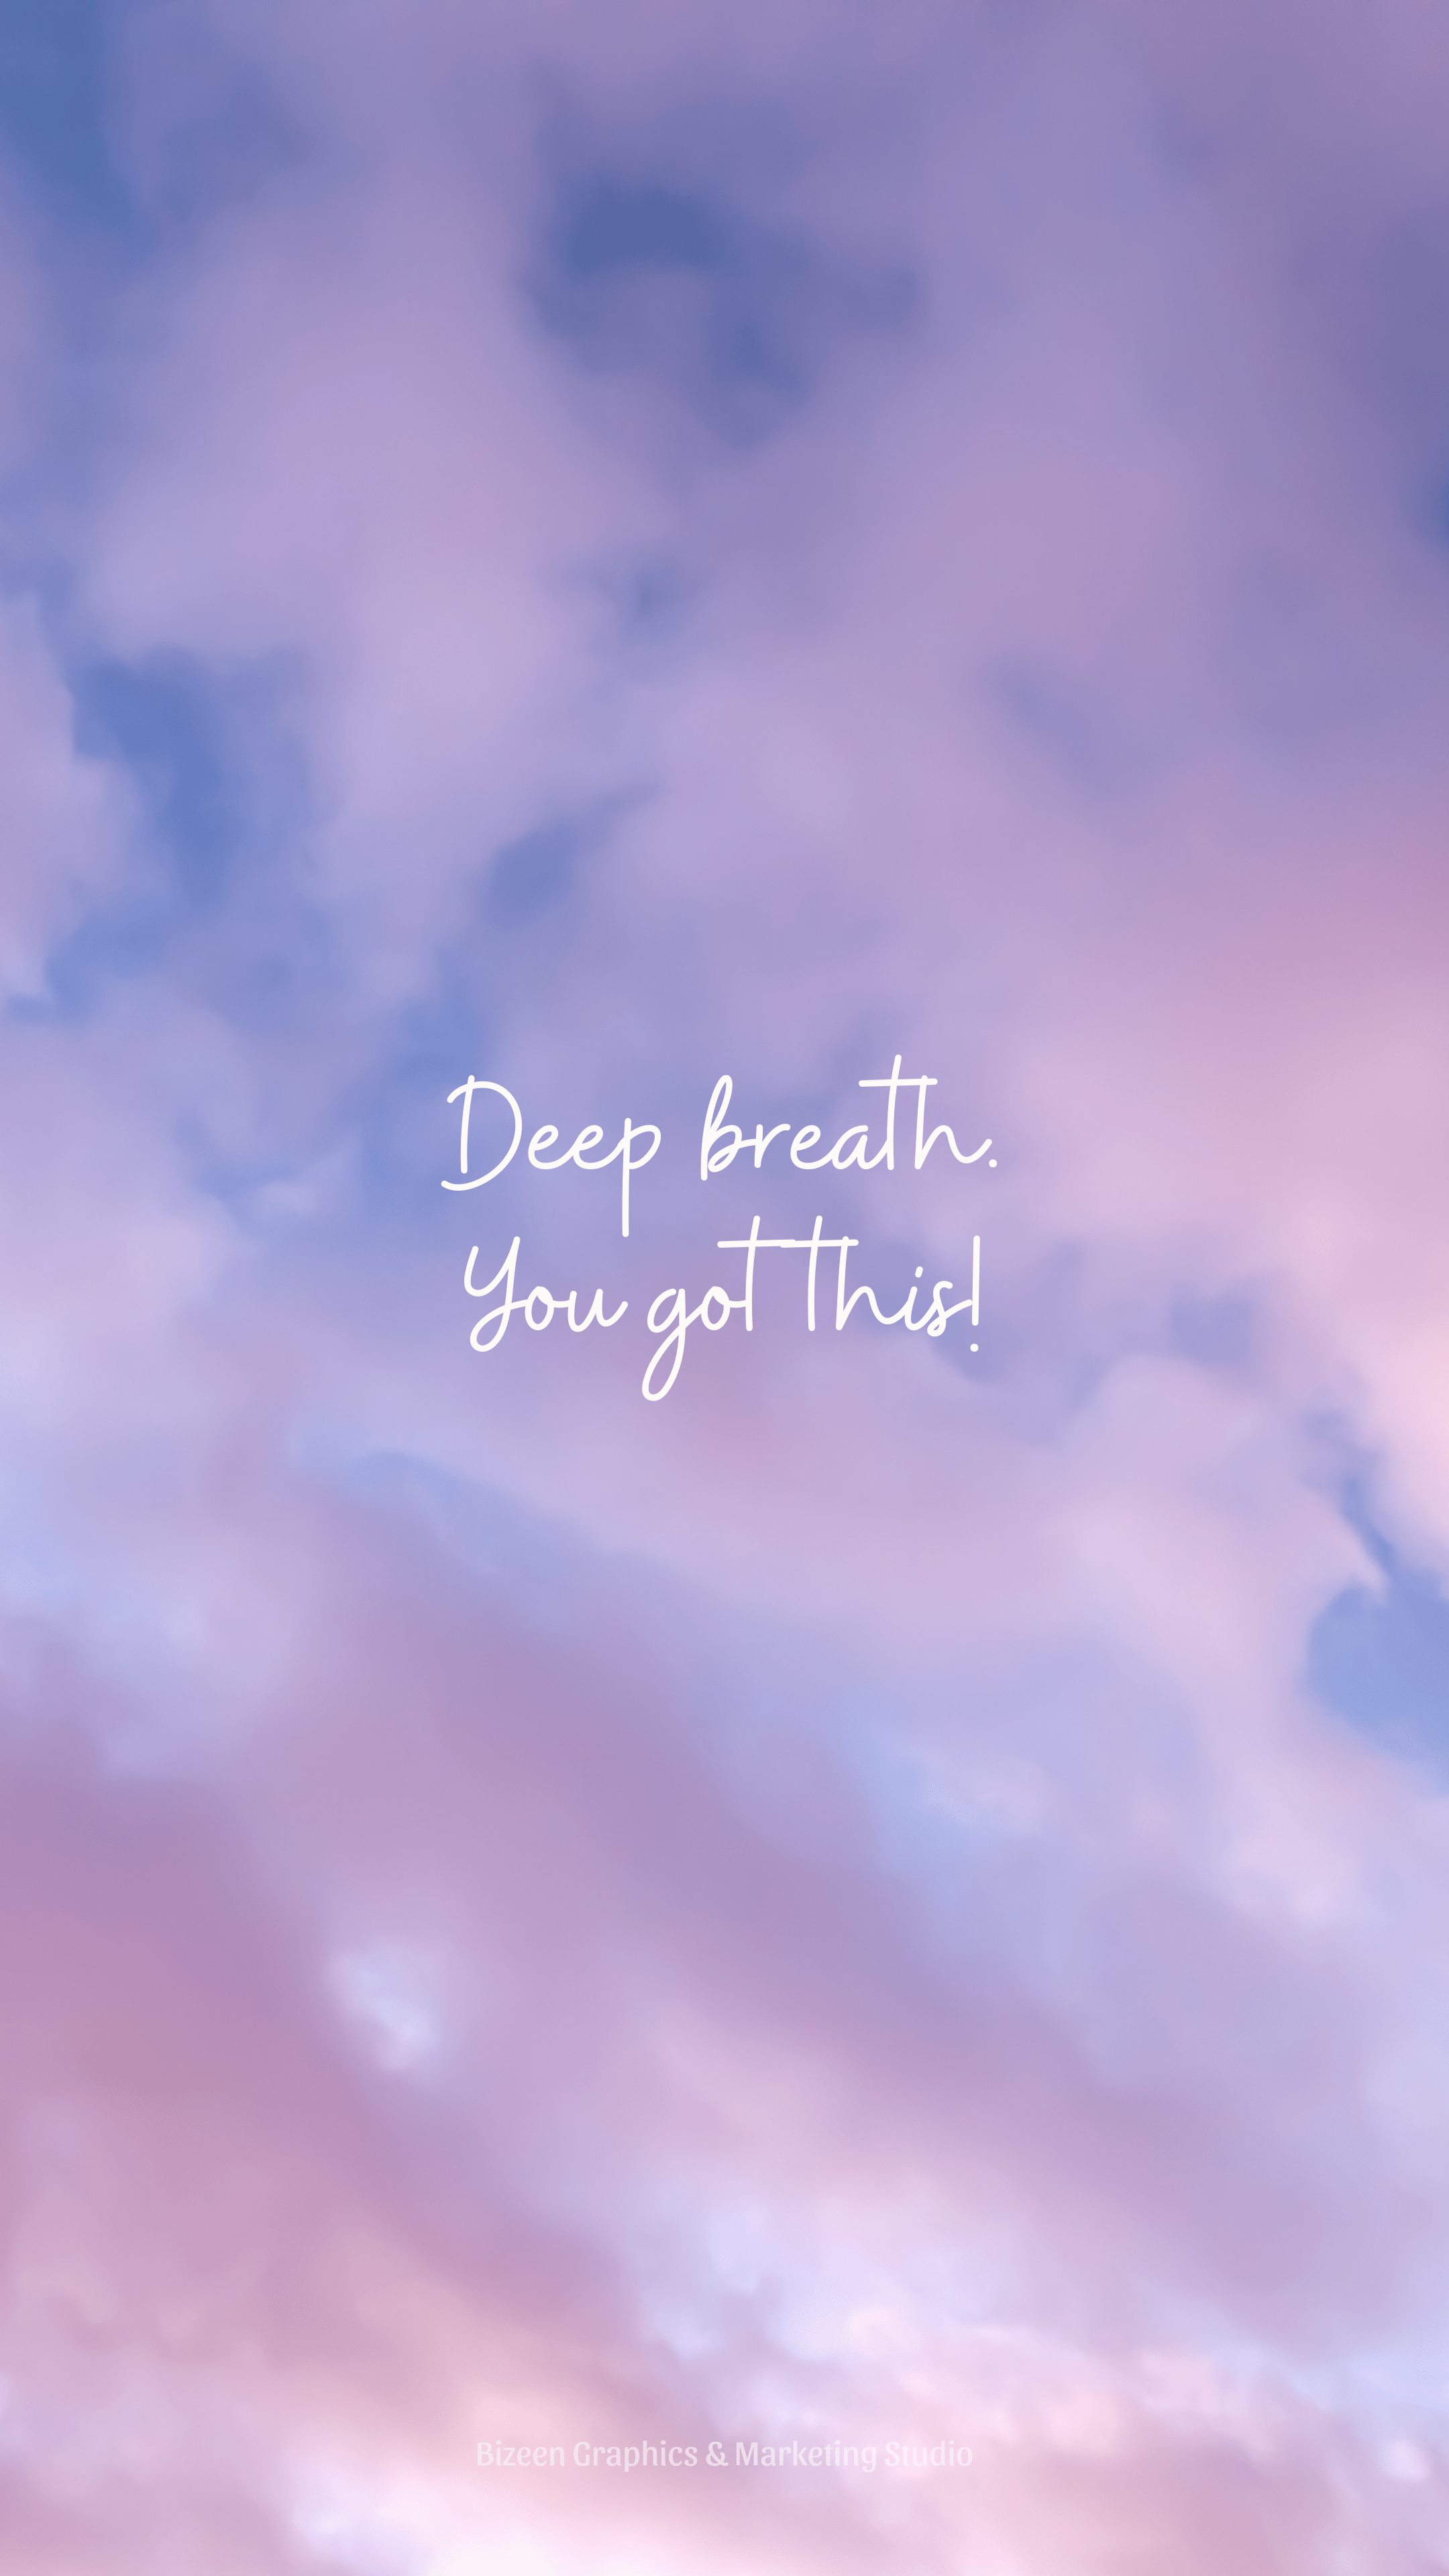 Aesthetic Wallpaper Quotes Motivational You got this!. iPhone wallpaper quotes inspirational, Positive quotes wallpaper, Inspirational quotes wallpaper